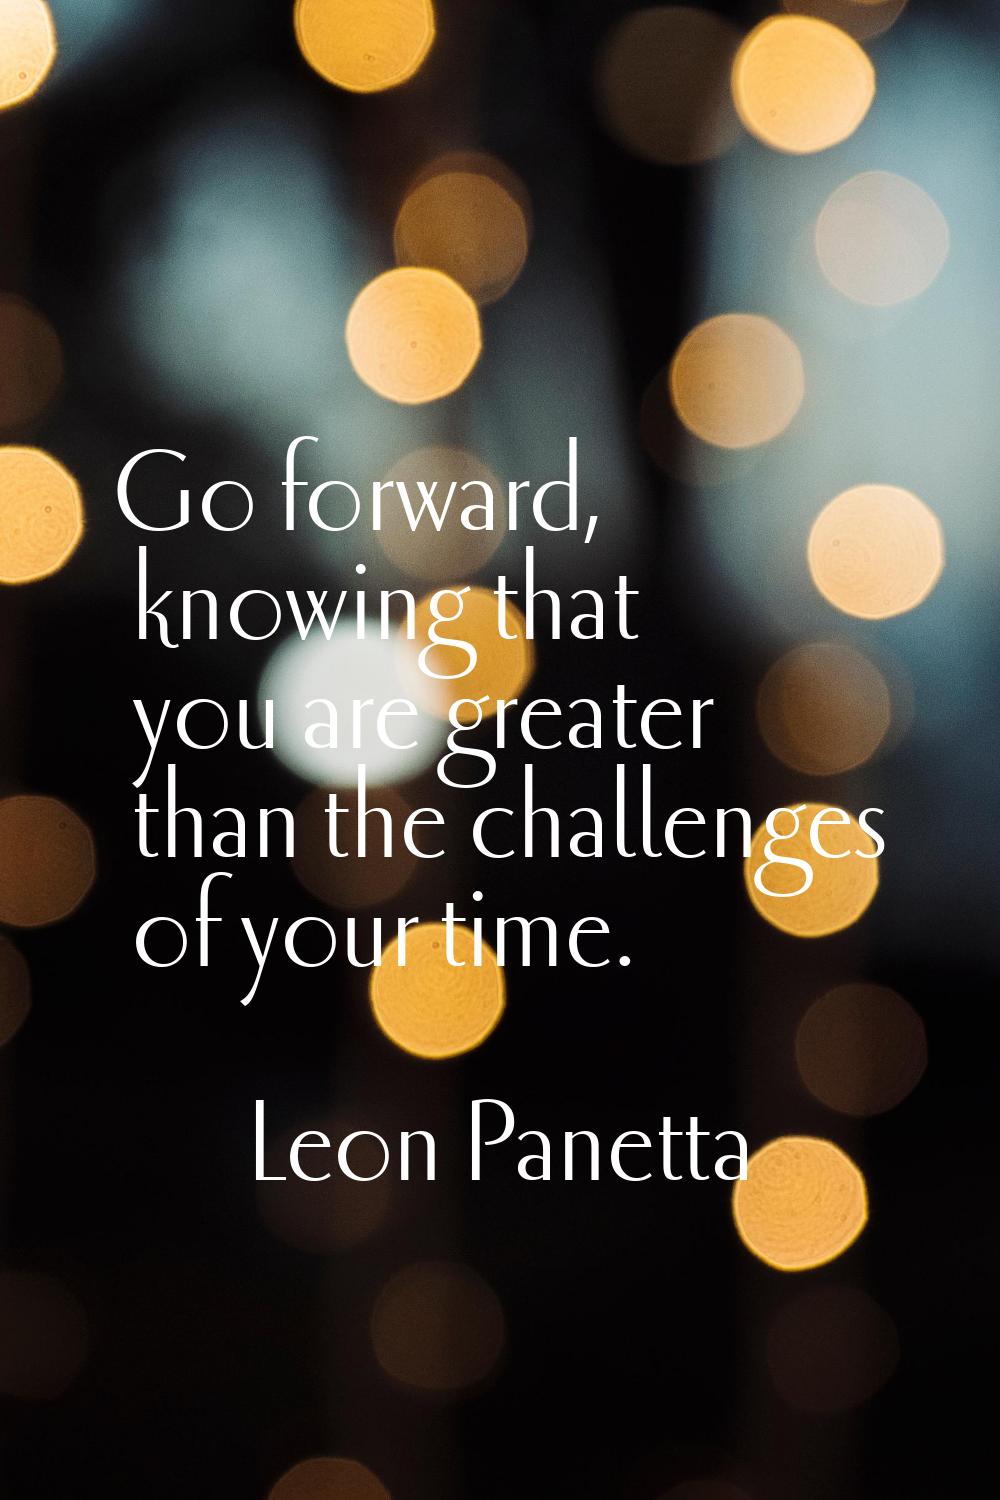 Go forward, knowing that you are greater than the challenges of your time.